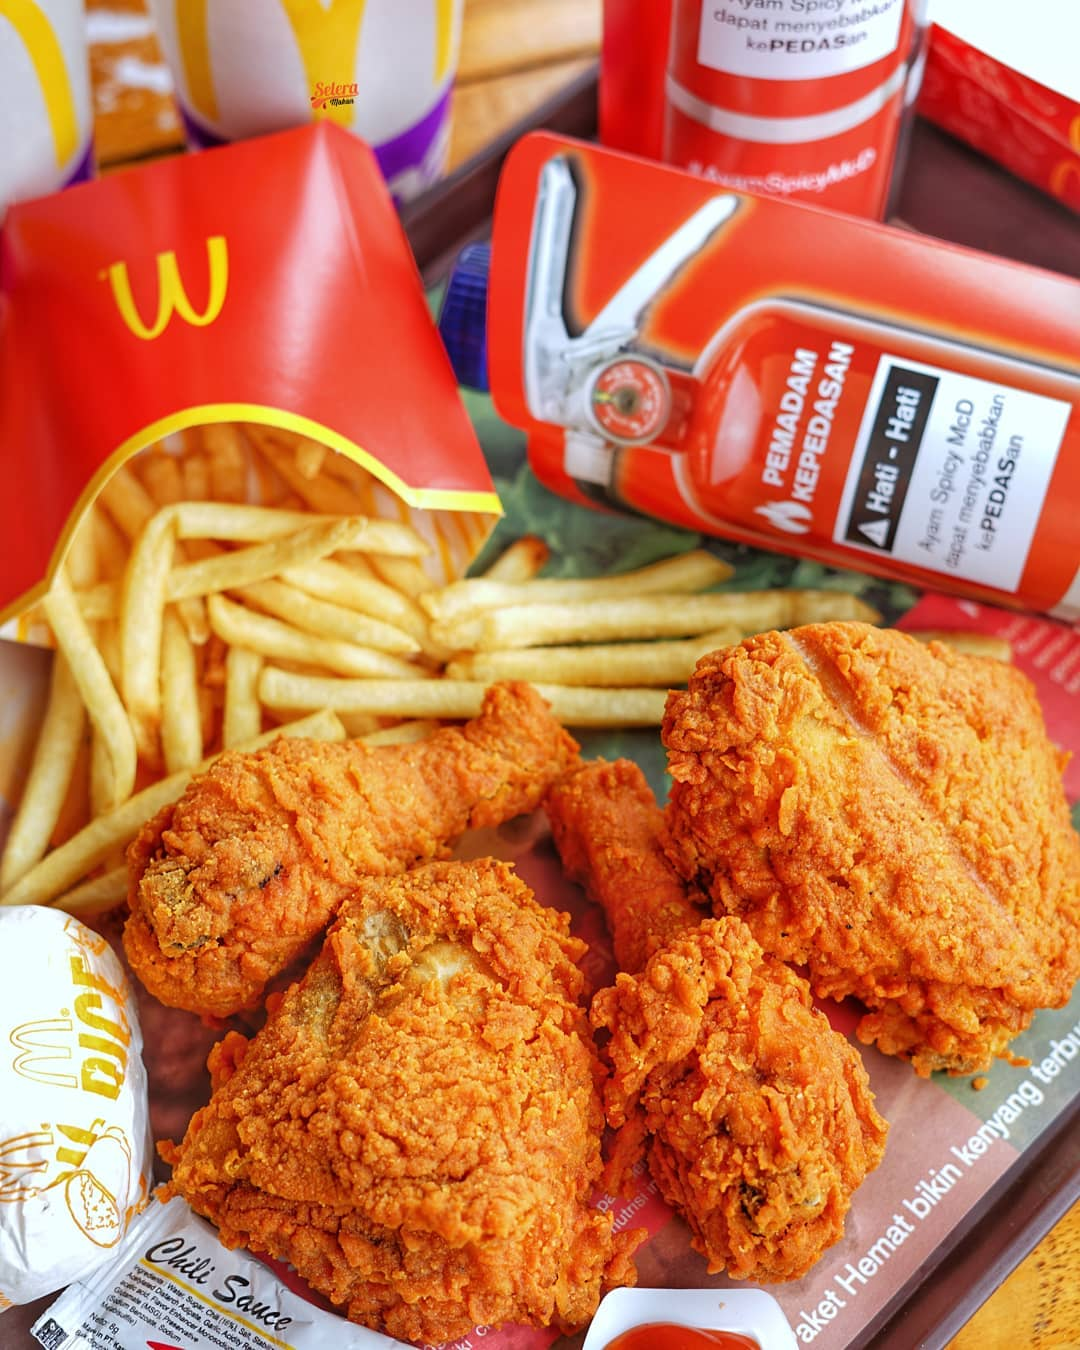 M'sian teacher slams organiser for tricking students into thinking they were having mcdonald's fried chicken